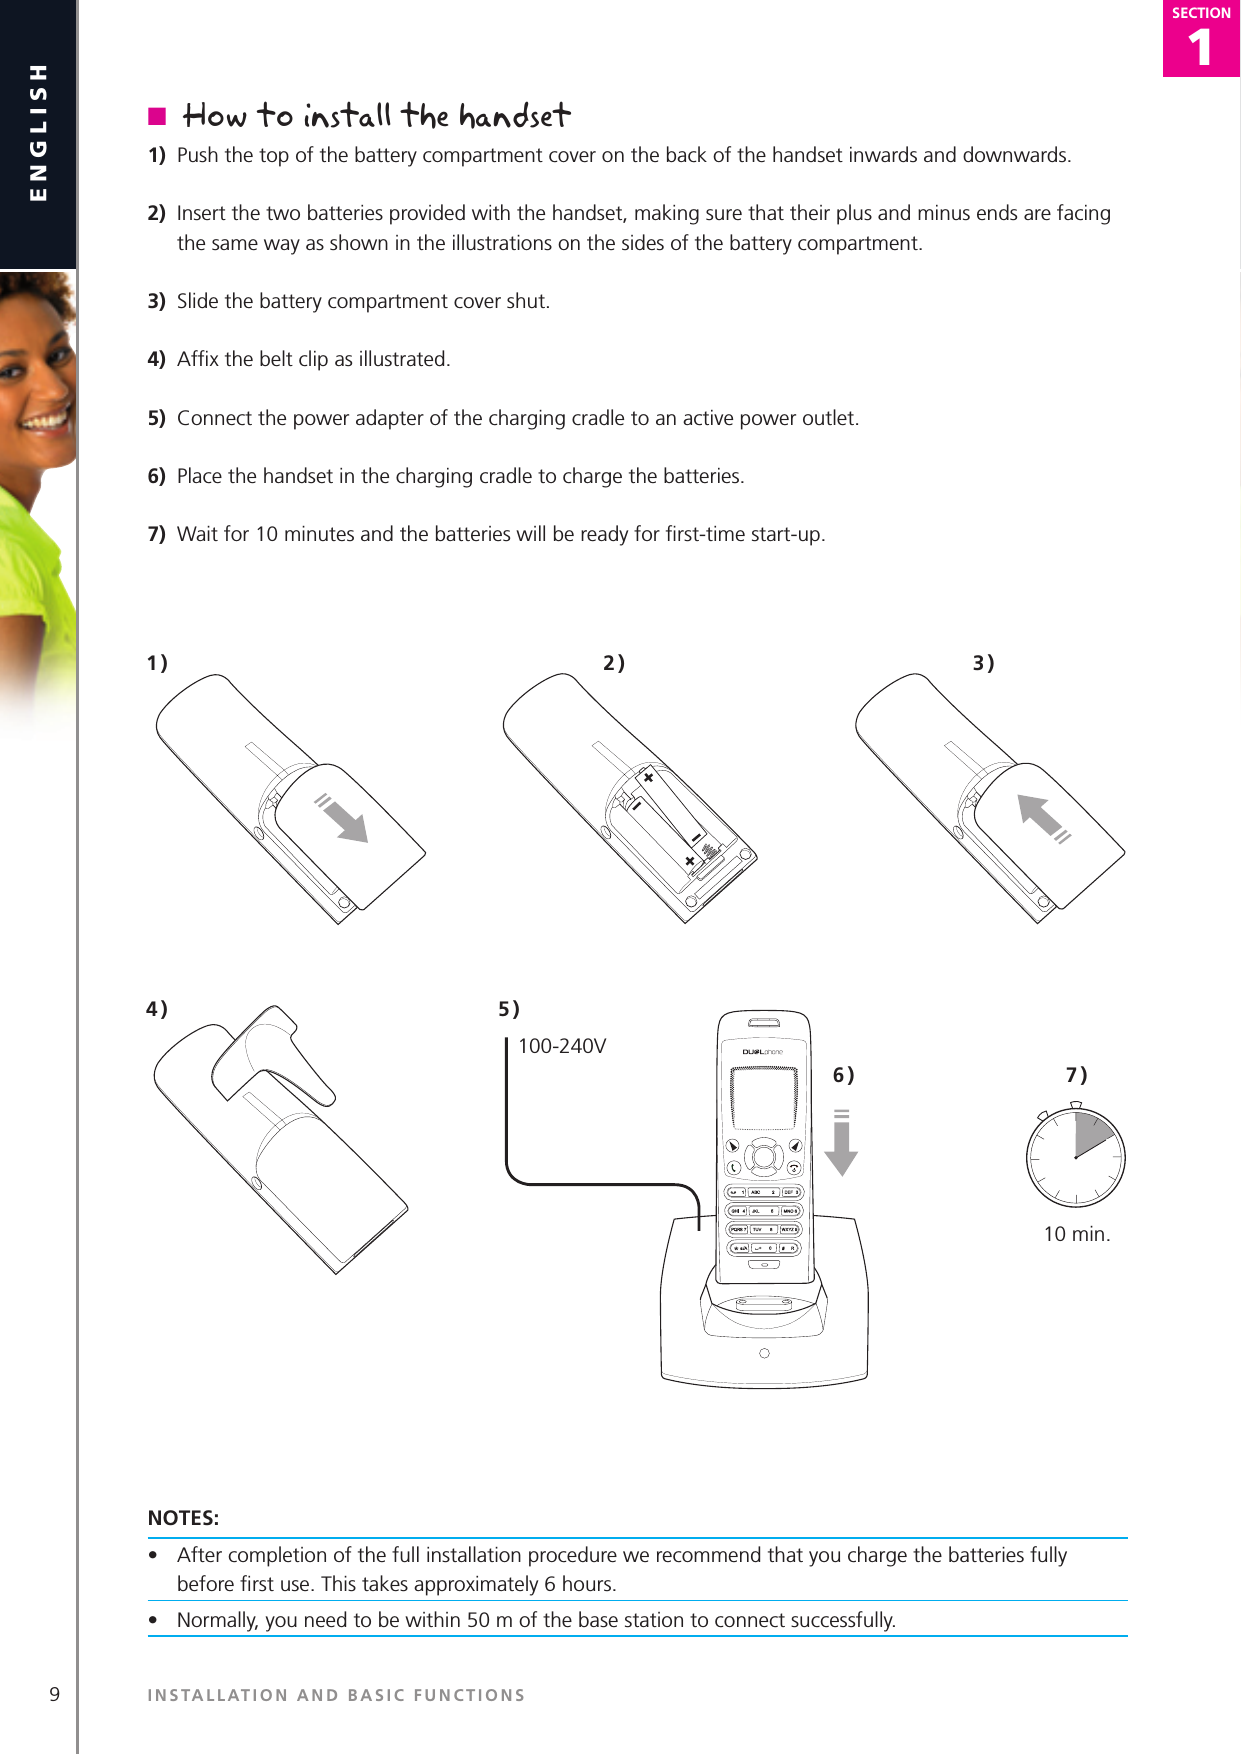 9english1SECTIONSECTIONn  How to install the handset1)  Push the top of the battery compartment cover on the back of the handset inwards and downwards.2)  Insert the two batteries provided with the handset, making sure that their plus and minus ends are facing the same way as shown in the illustrations on the sides of the battery compartment.3)  Slide the battery compartment cover shut.4)  Afﬁx the belt clip as illustrated.5)  Connect the power adapter of the charging cradle to an active power outlet.6)  Place the handset in the charging cradle to charge the batteries.7)  Wait for 10 minutes and the batteries will be ready for ﬁrst-time start-up. NOTES:•  After completion of the full installation procedure we recommend that you charge the batteries fully before ﬁrst use. This takes approximately 6 hours.    •  Normally, you need to be within 50 m of the base station to connect successfully. 1 )100-240V2 ) 3 )4 ) 5 )6 ) 7 )10 min.INSTALLATION AND BASIC FUNCTIONS